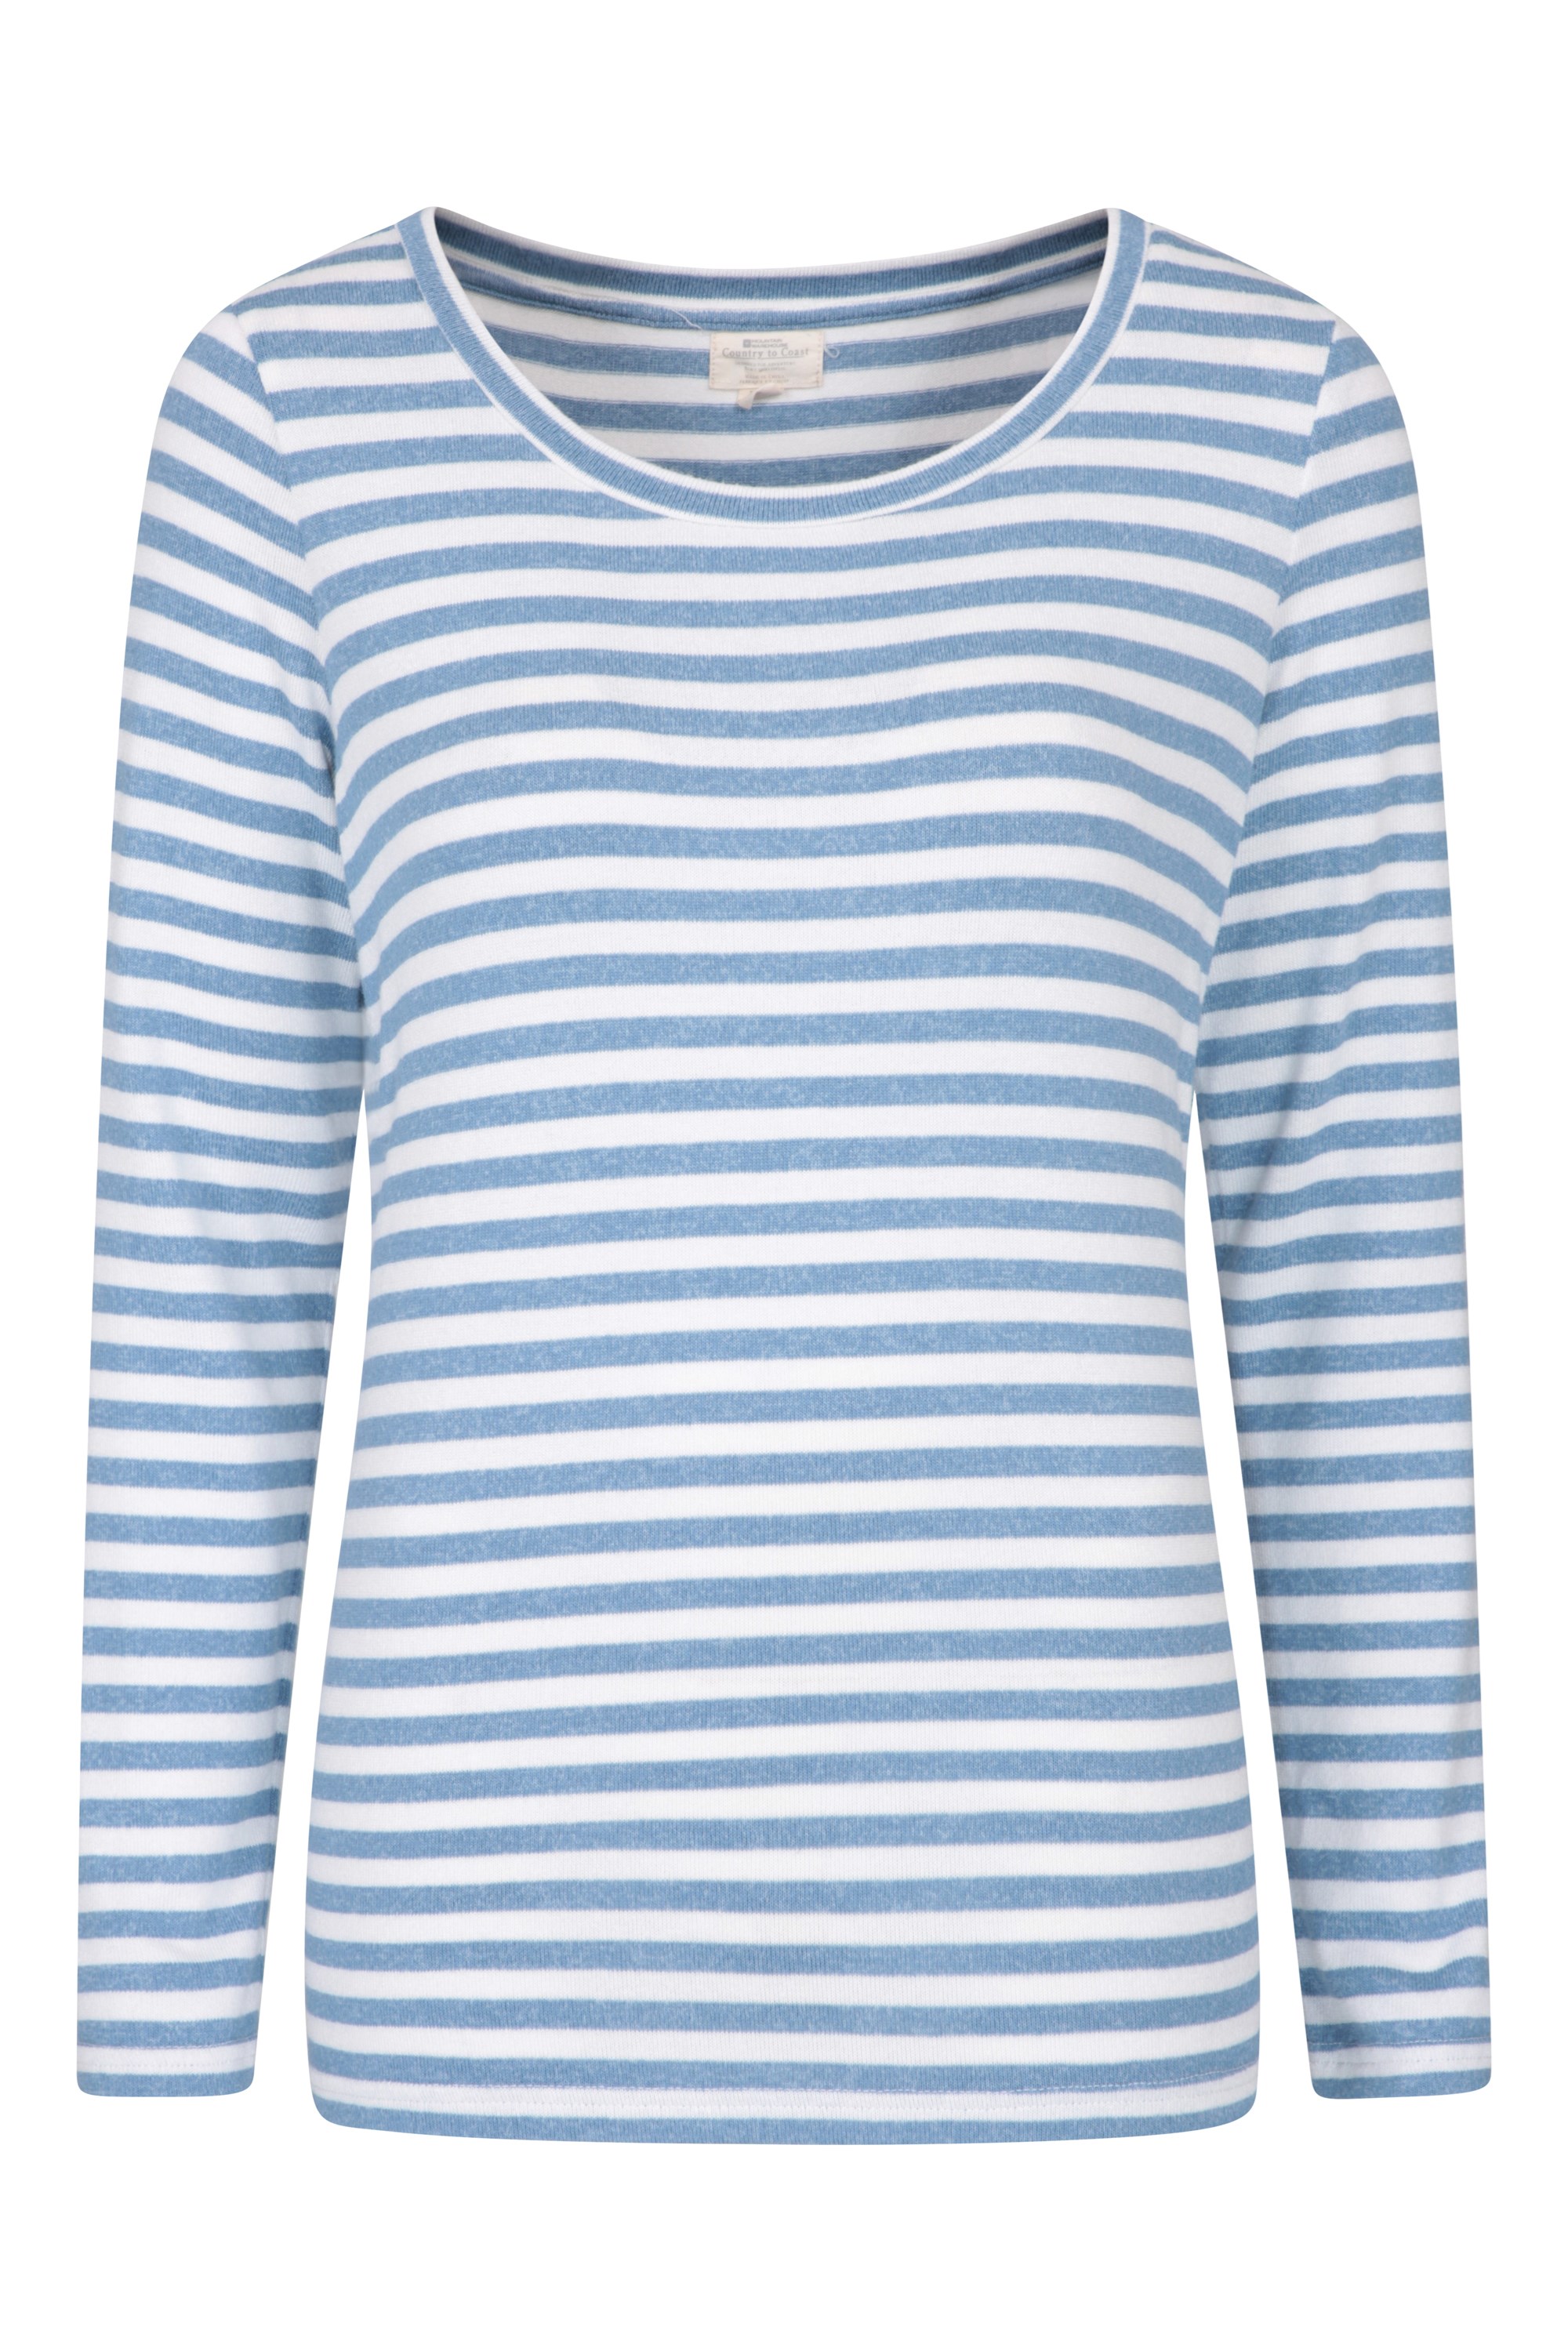 Stripe Womens Knitted Jumper | Mountain Warehouse GB